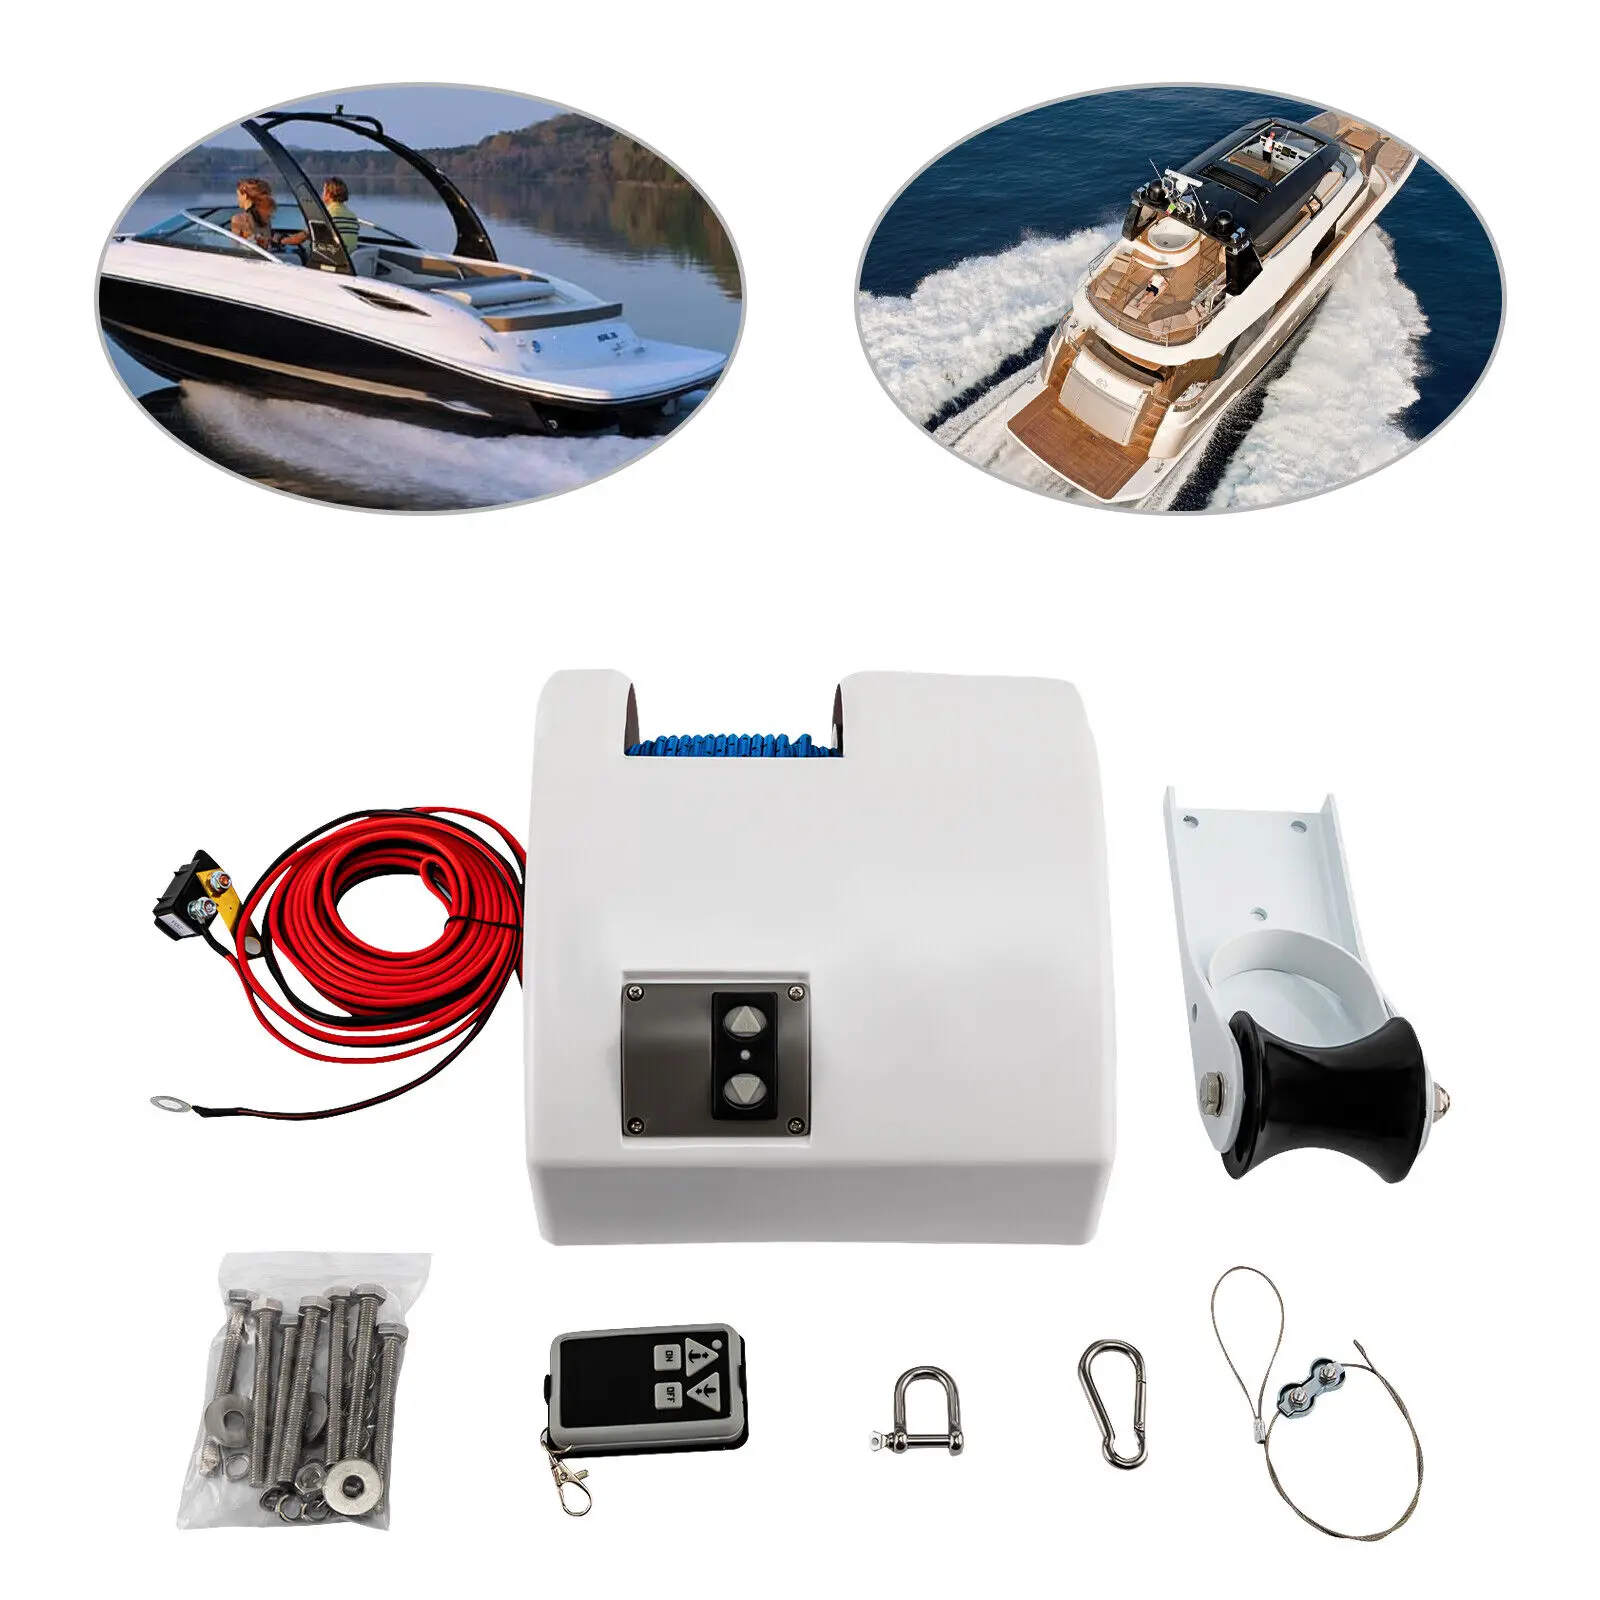 12V  25LBS Boat Marine Electric Windlass Anchor Winch W/Wireless Remote Control 315mhz 433 92mhz wireless winch remote control used for off road vehicles